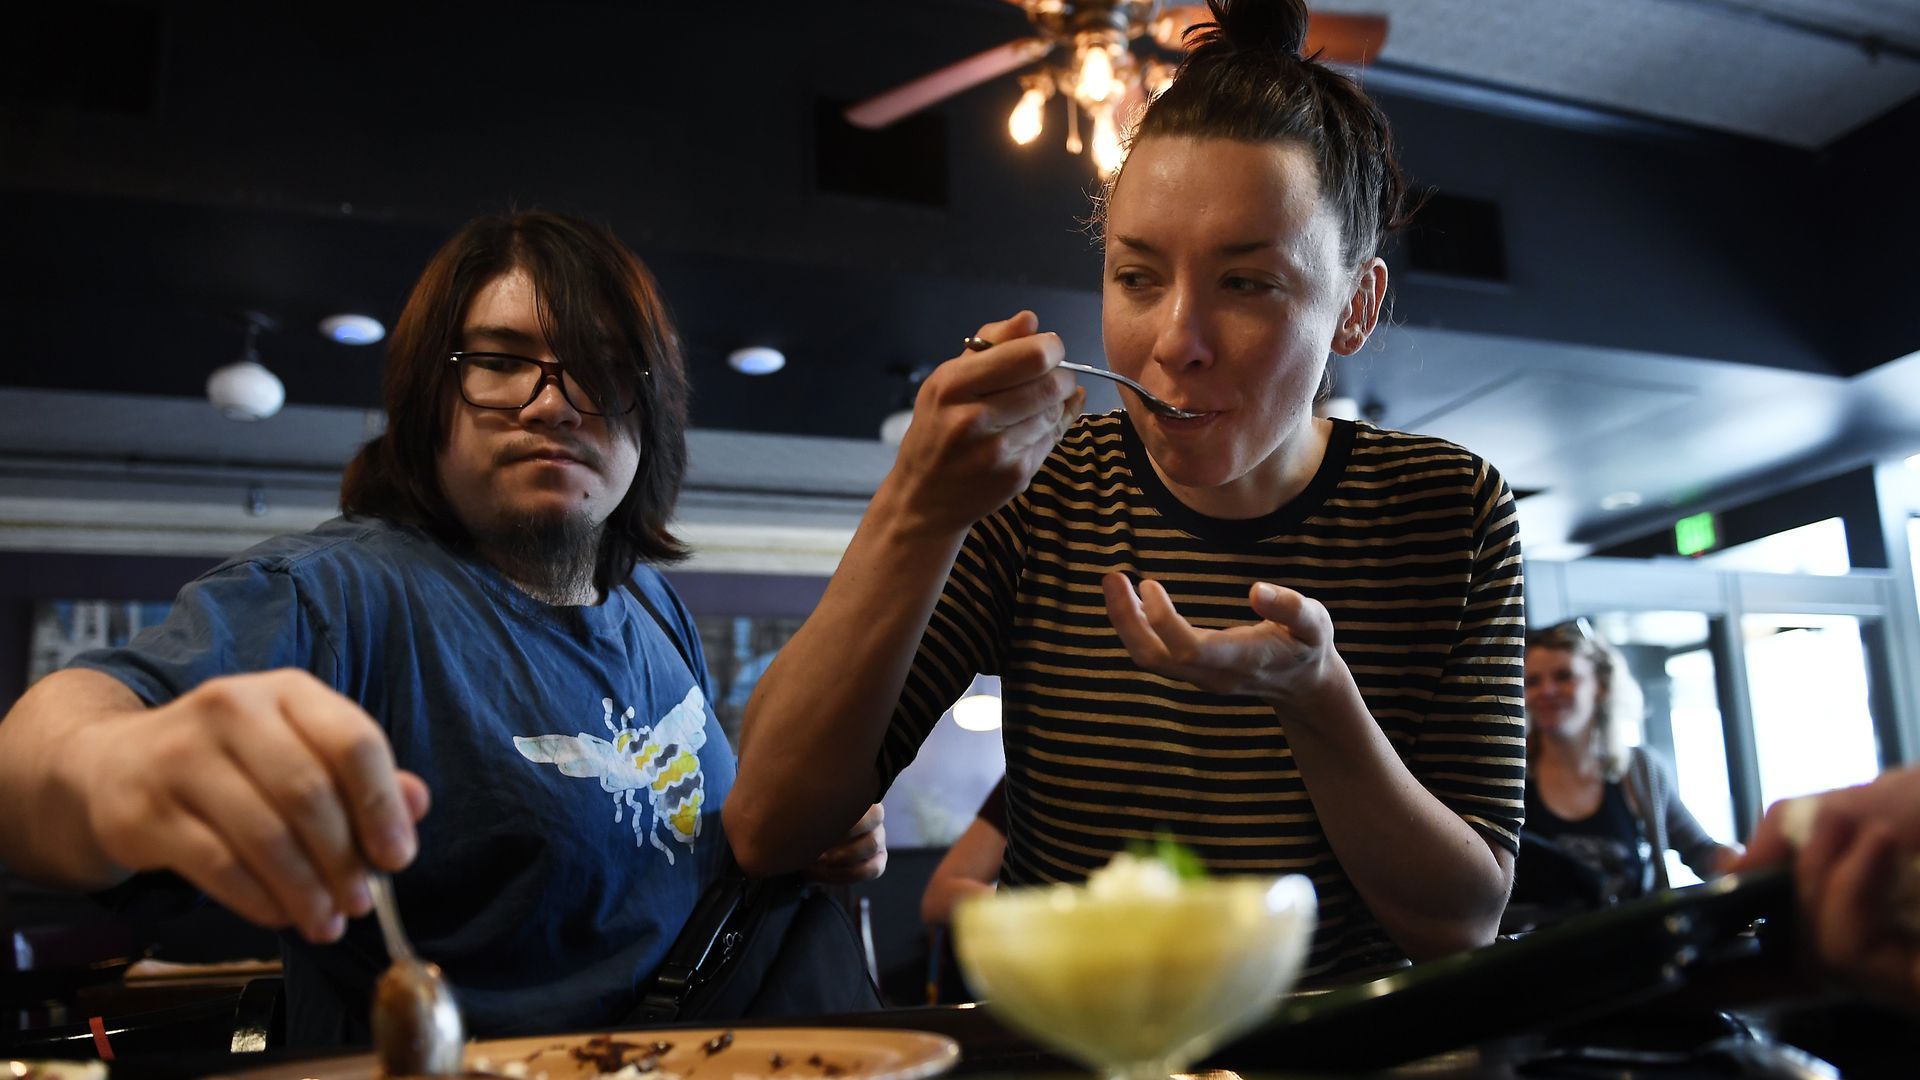 A photo of two people trying bites to eat at a restaurant